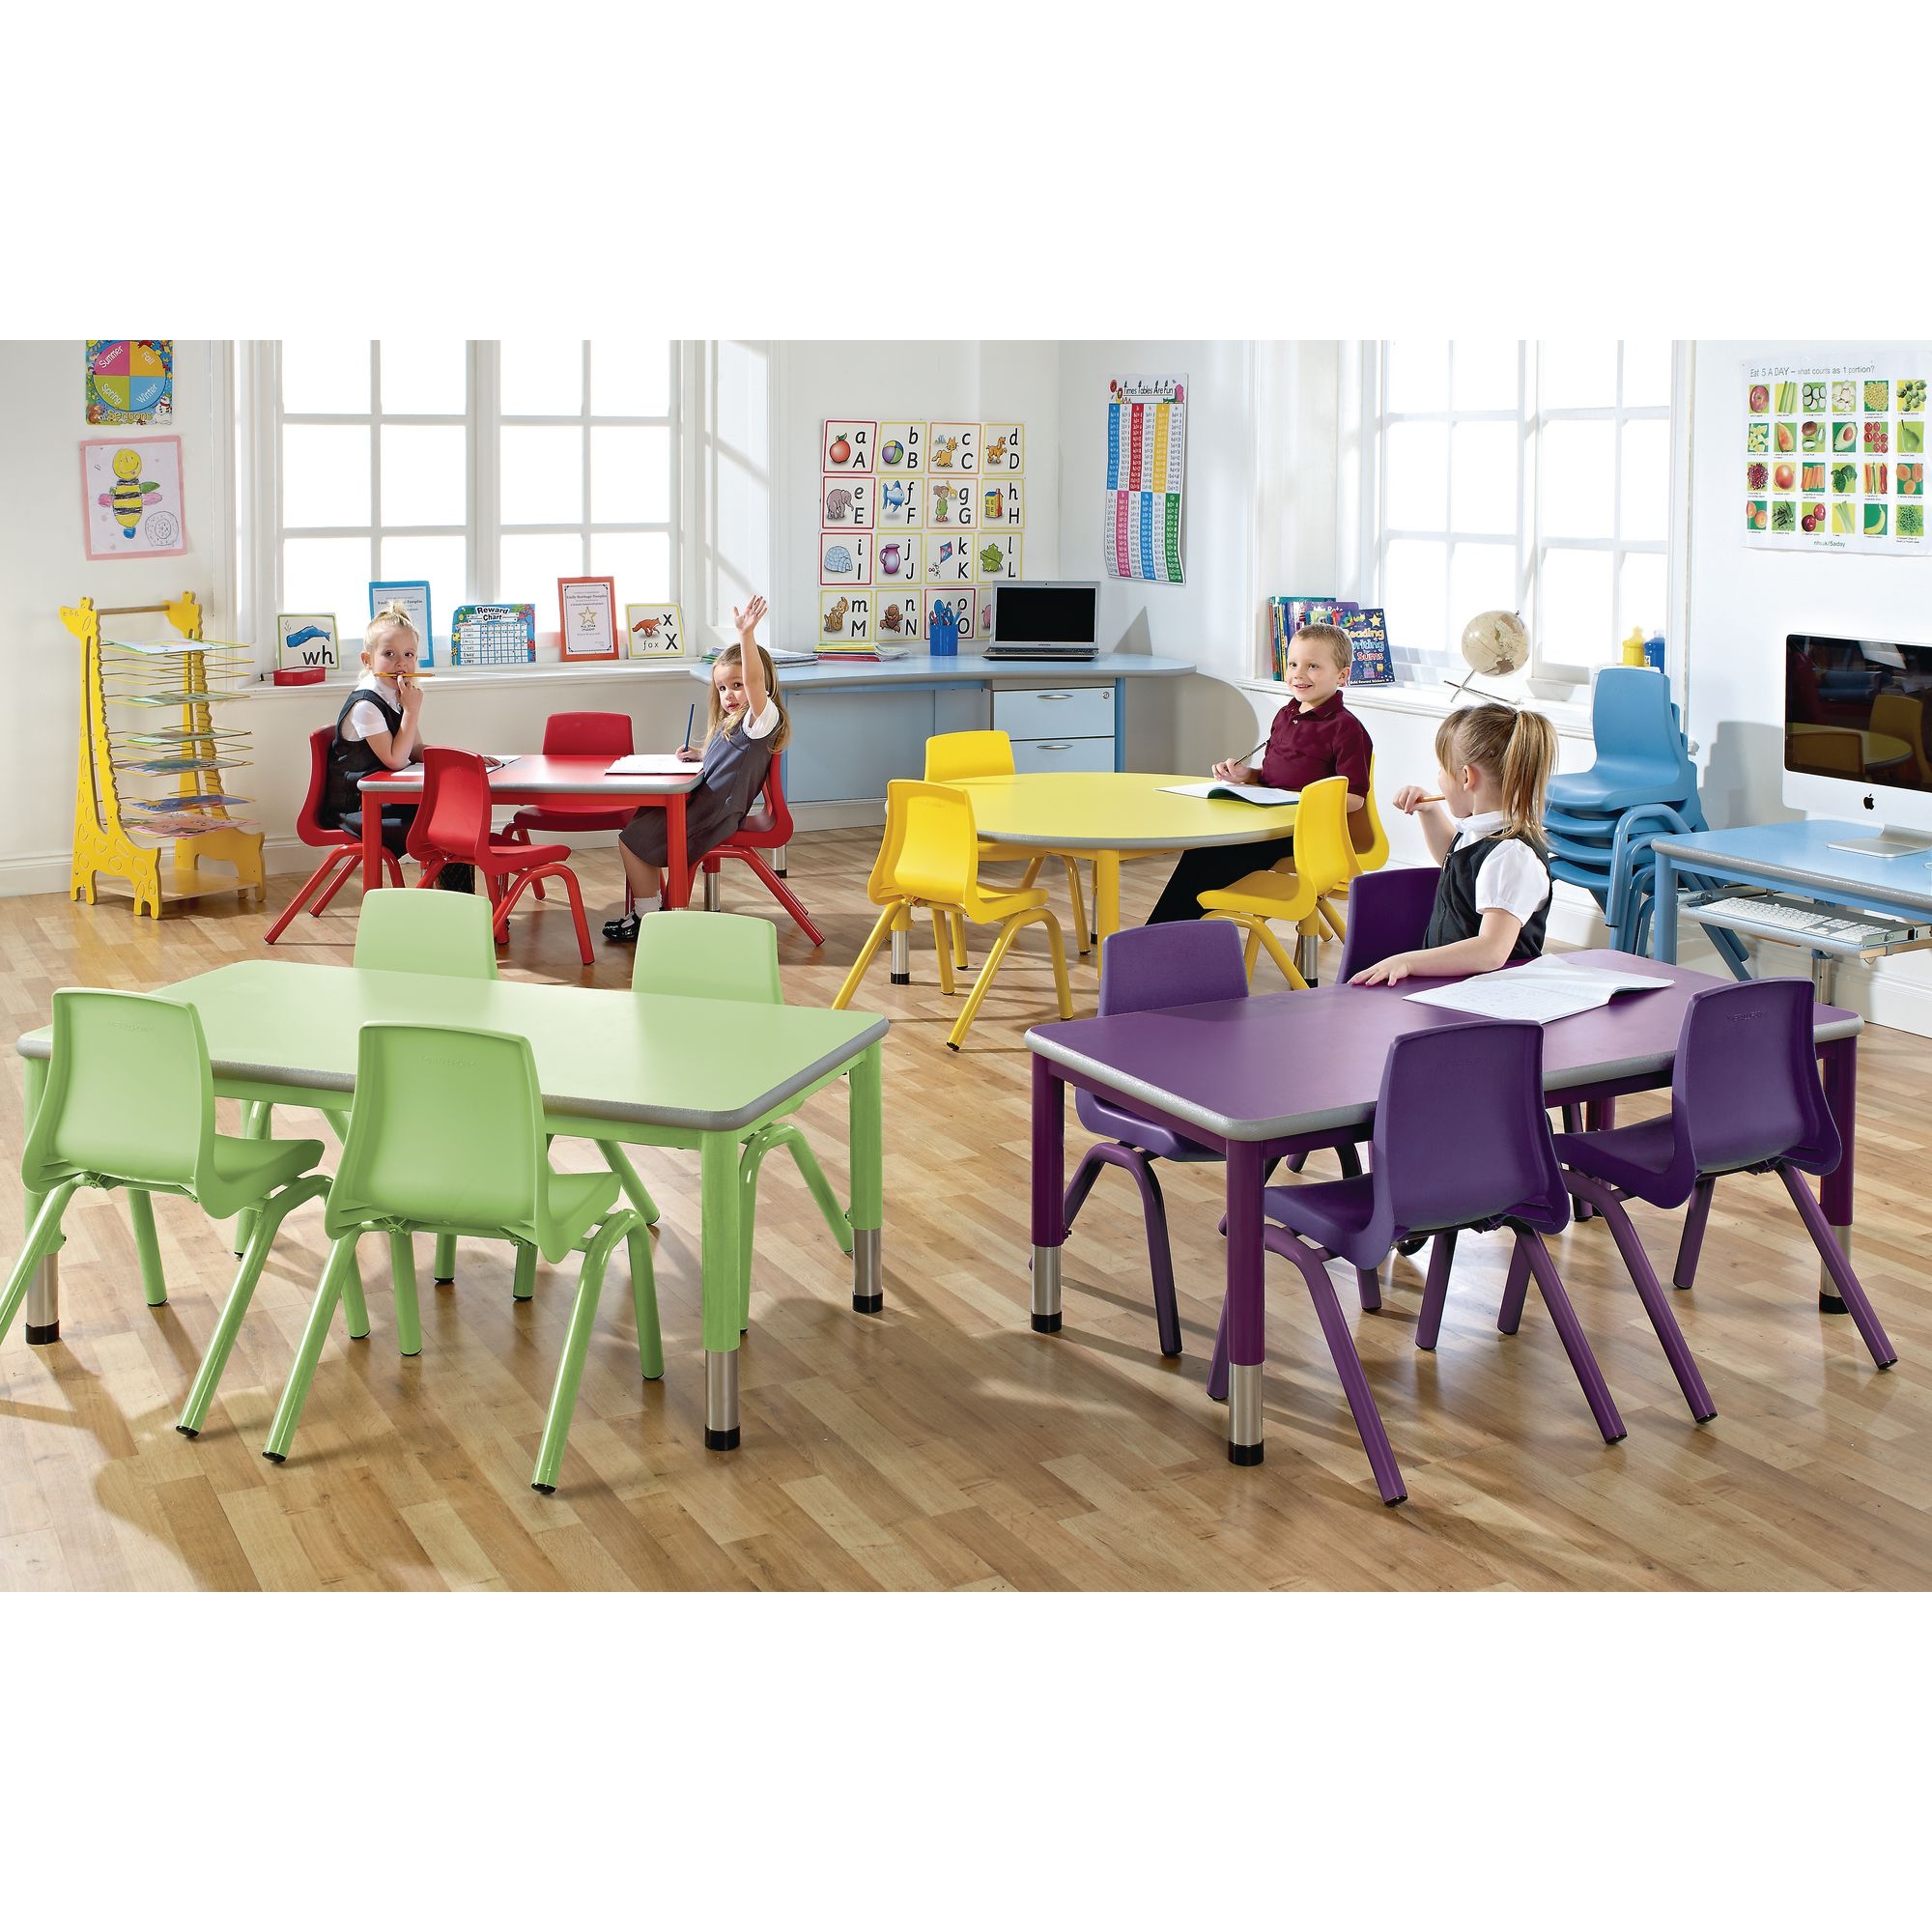 Harlequin Rectangular Height Adjustable Steel Classroom Pack: Table and 4 Chairs - 900 x 600 x 640mm - Yellow